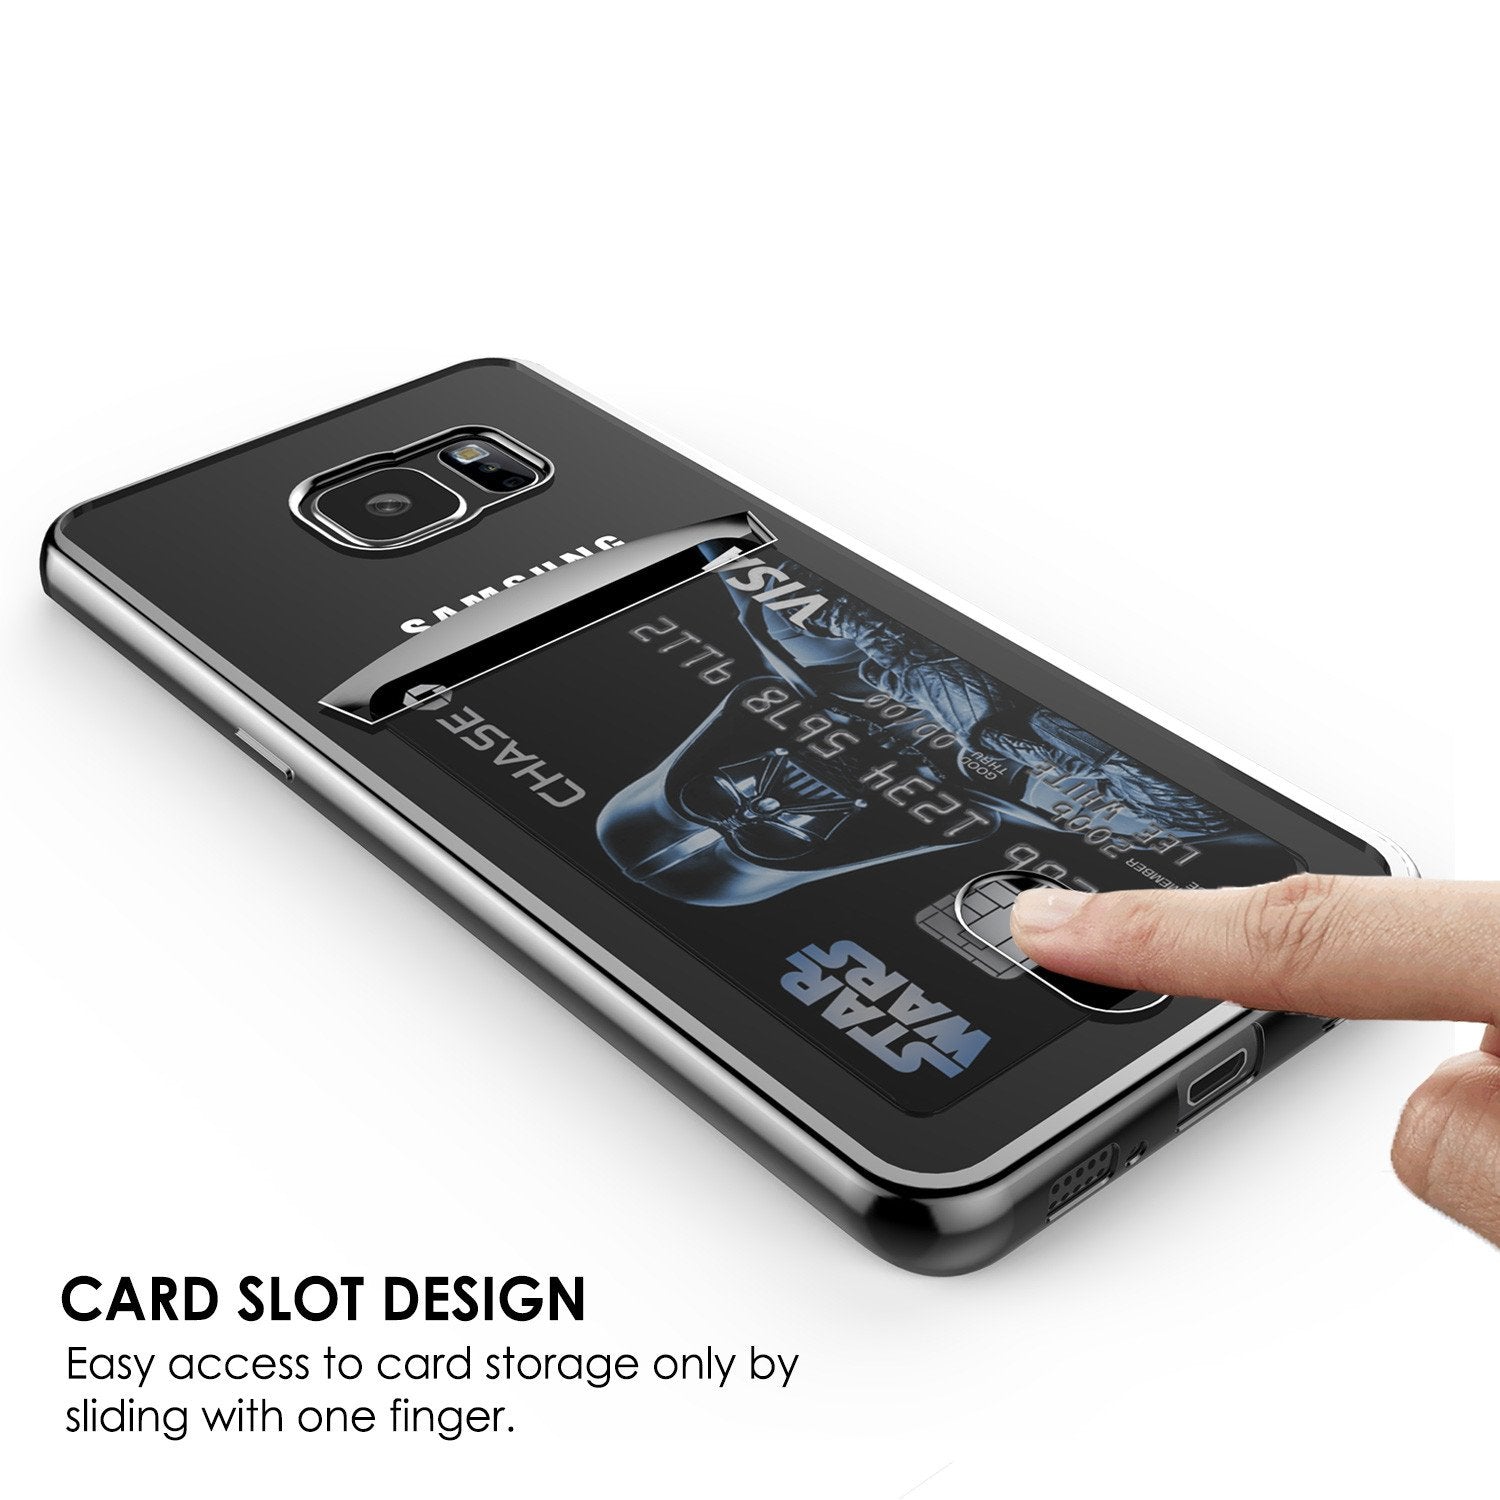 Galaxy S6 Case, PUNKCASE® LUCID Black Series | Card Slot | SHIELD Screen Protector | Ultra fit - PunkCase NZ